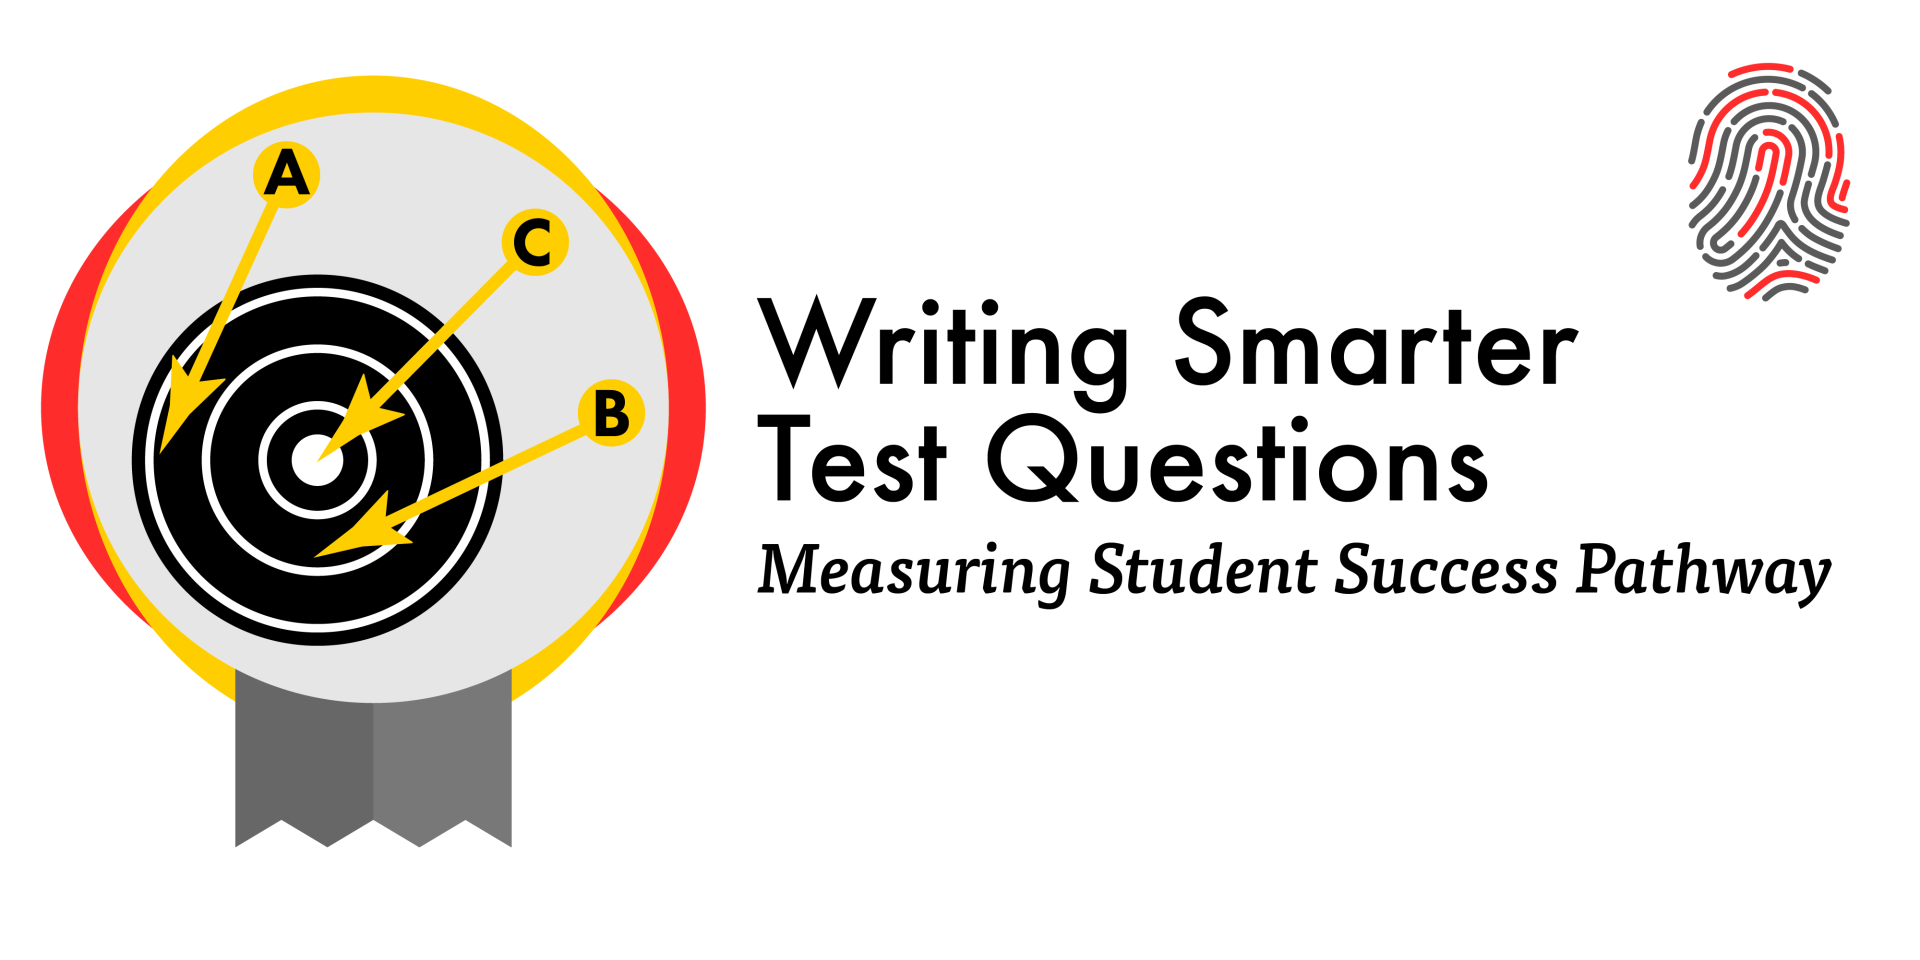 Writing Smarter Test Questions, Measuring Student Success Pathway